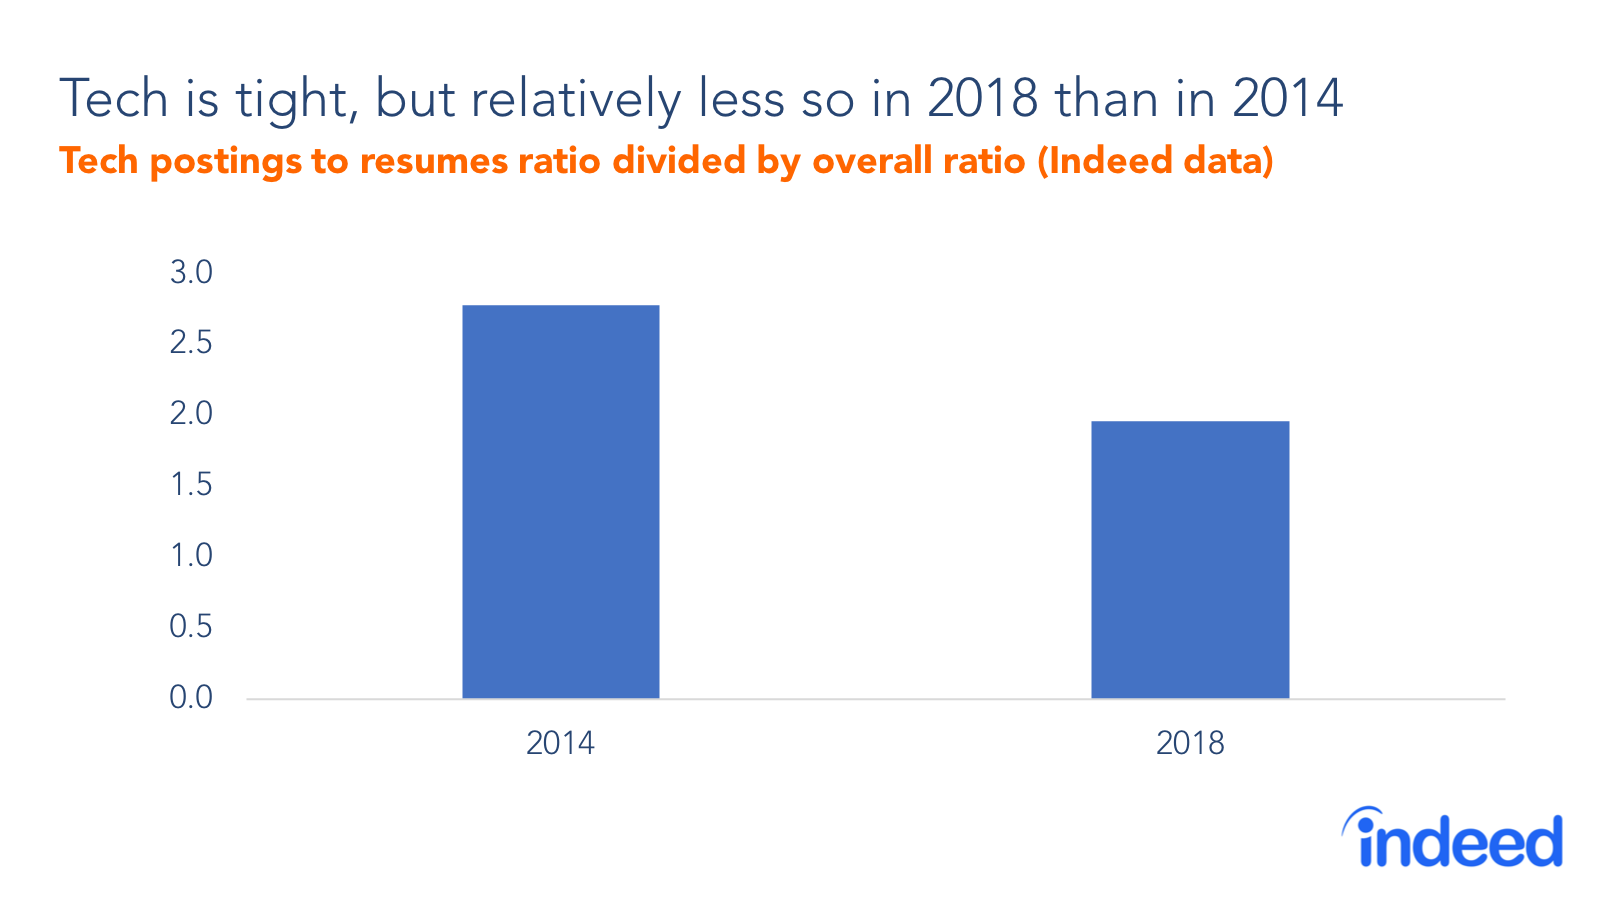 Tech postings to resumes ratio divided by overall ratio (Indeed data)